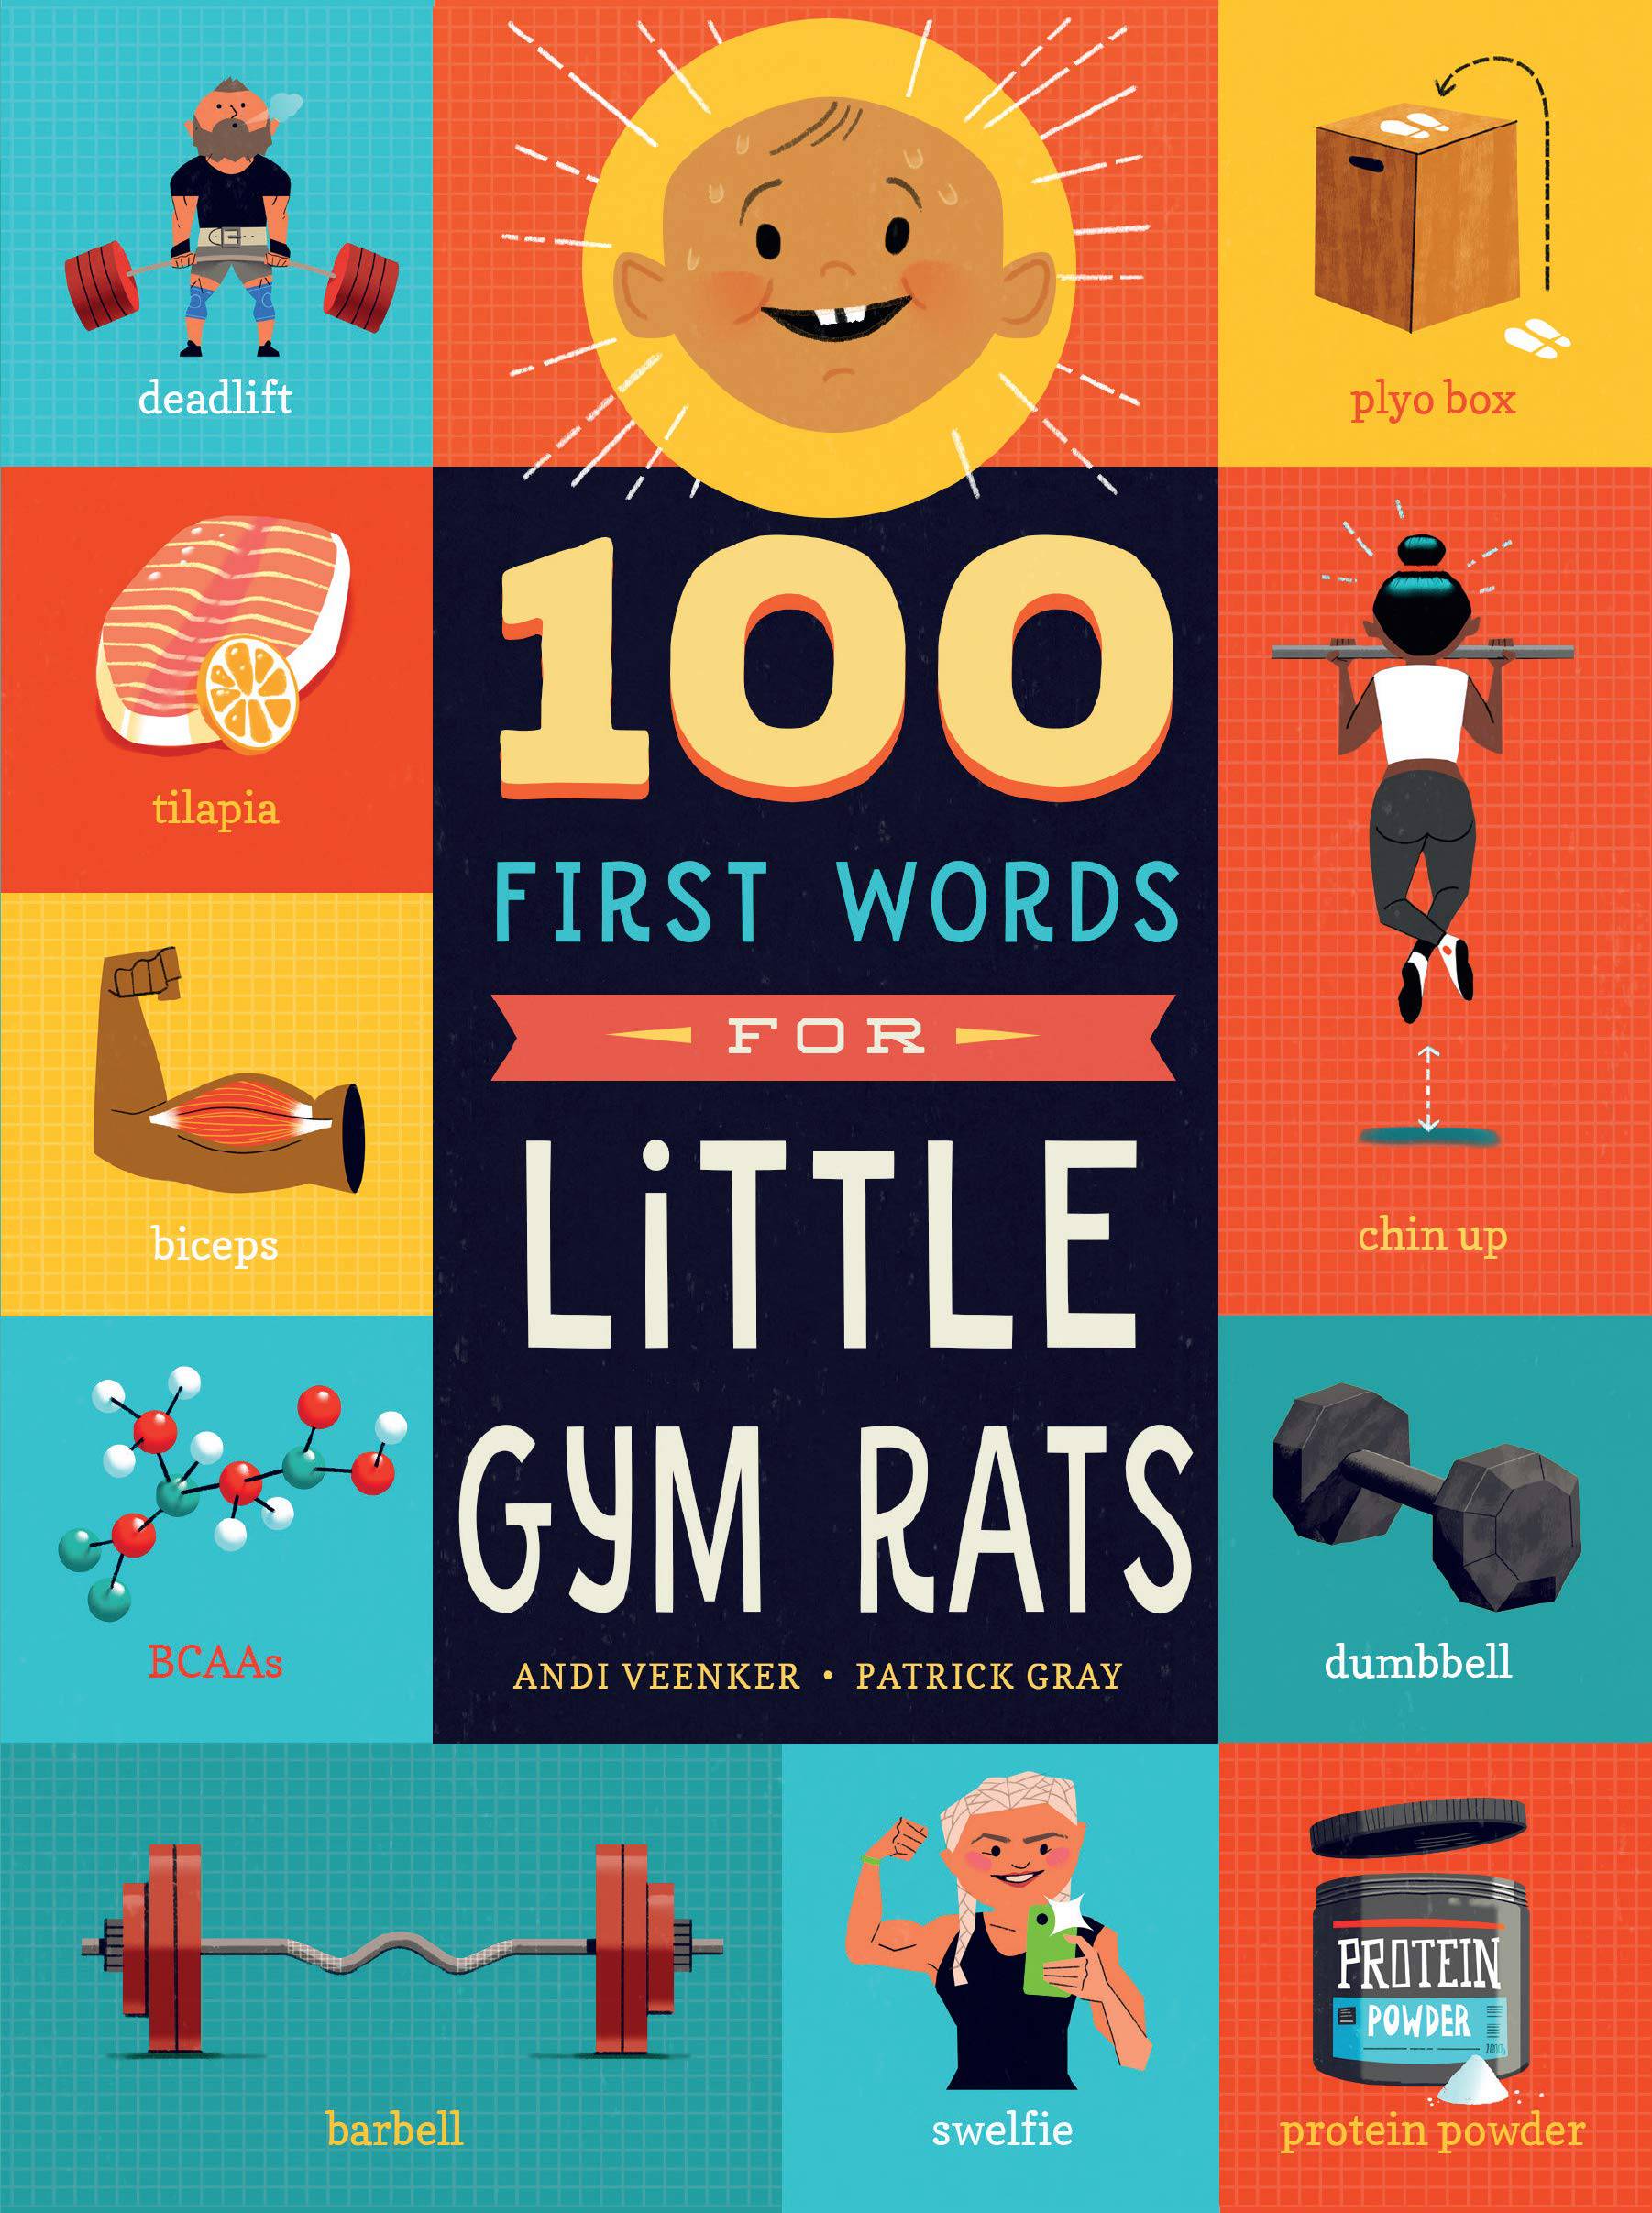 100 First Words for Little Gym Rats - Twinkle Twinkle Little One